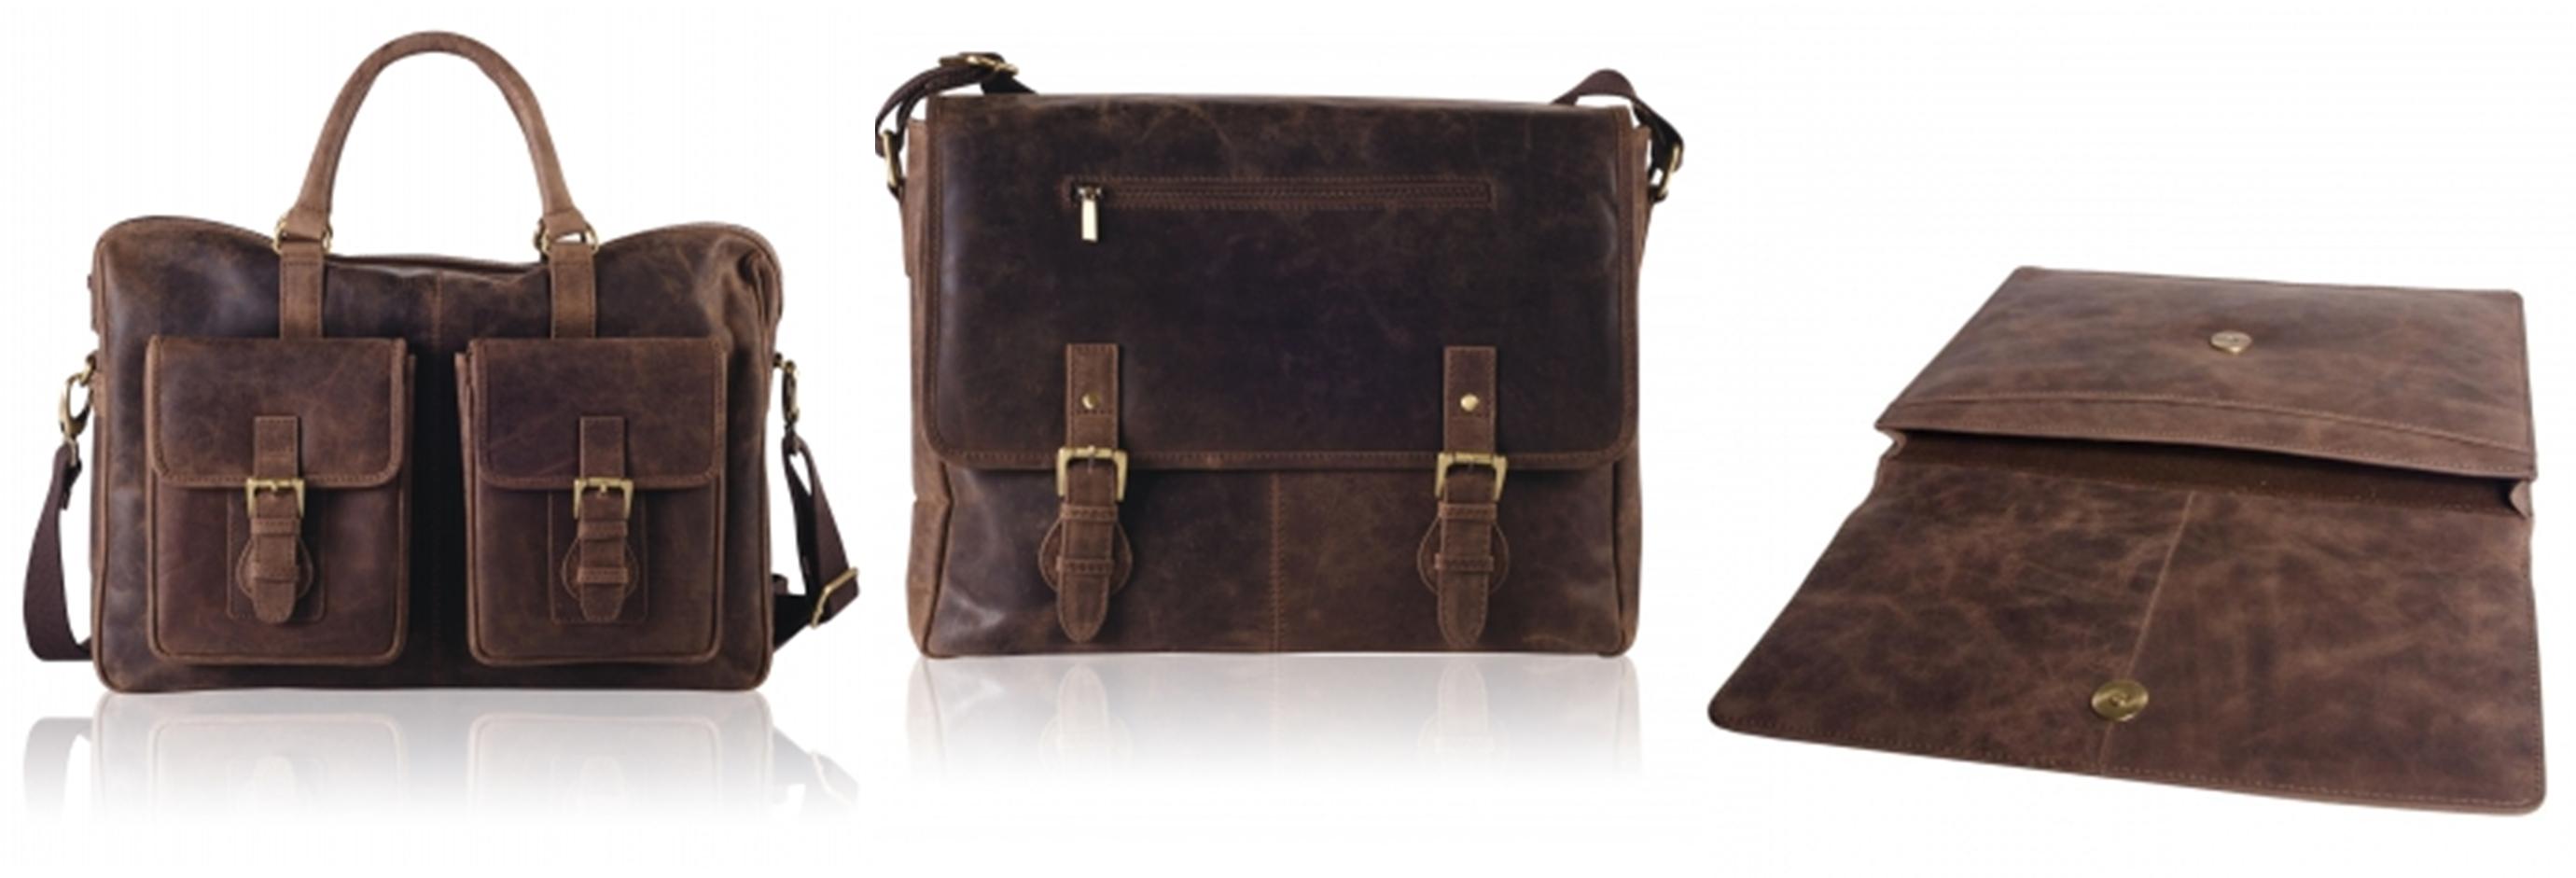 distressed leather laptop bag holdall and satchel from teals boutique